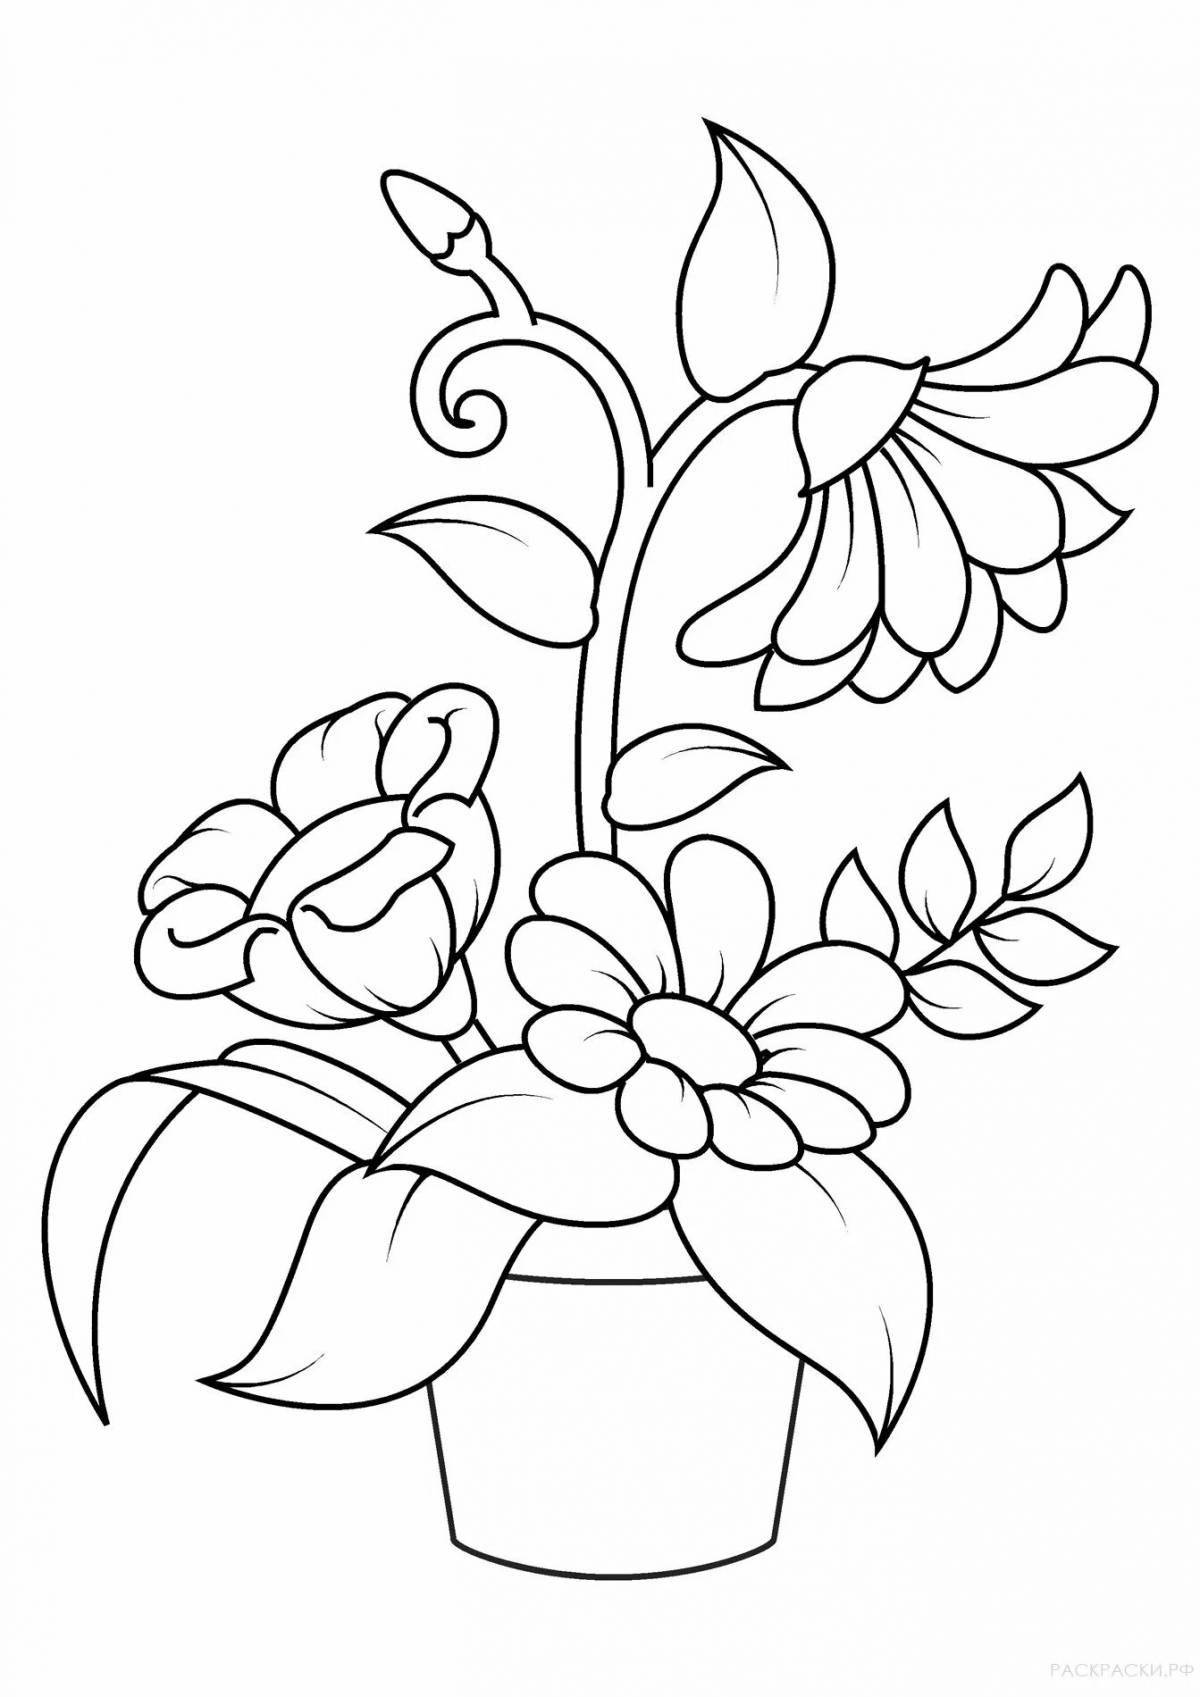 Adorable indoor flowers coloring book for 4-5 year olds